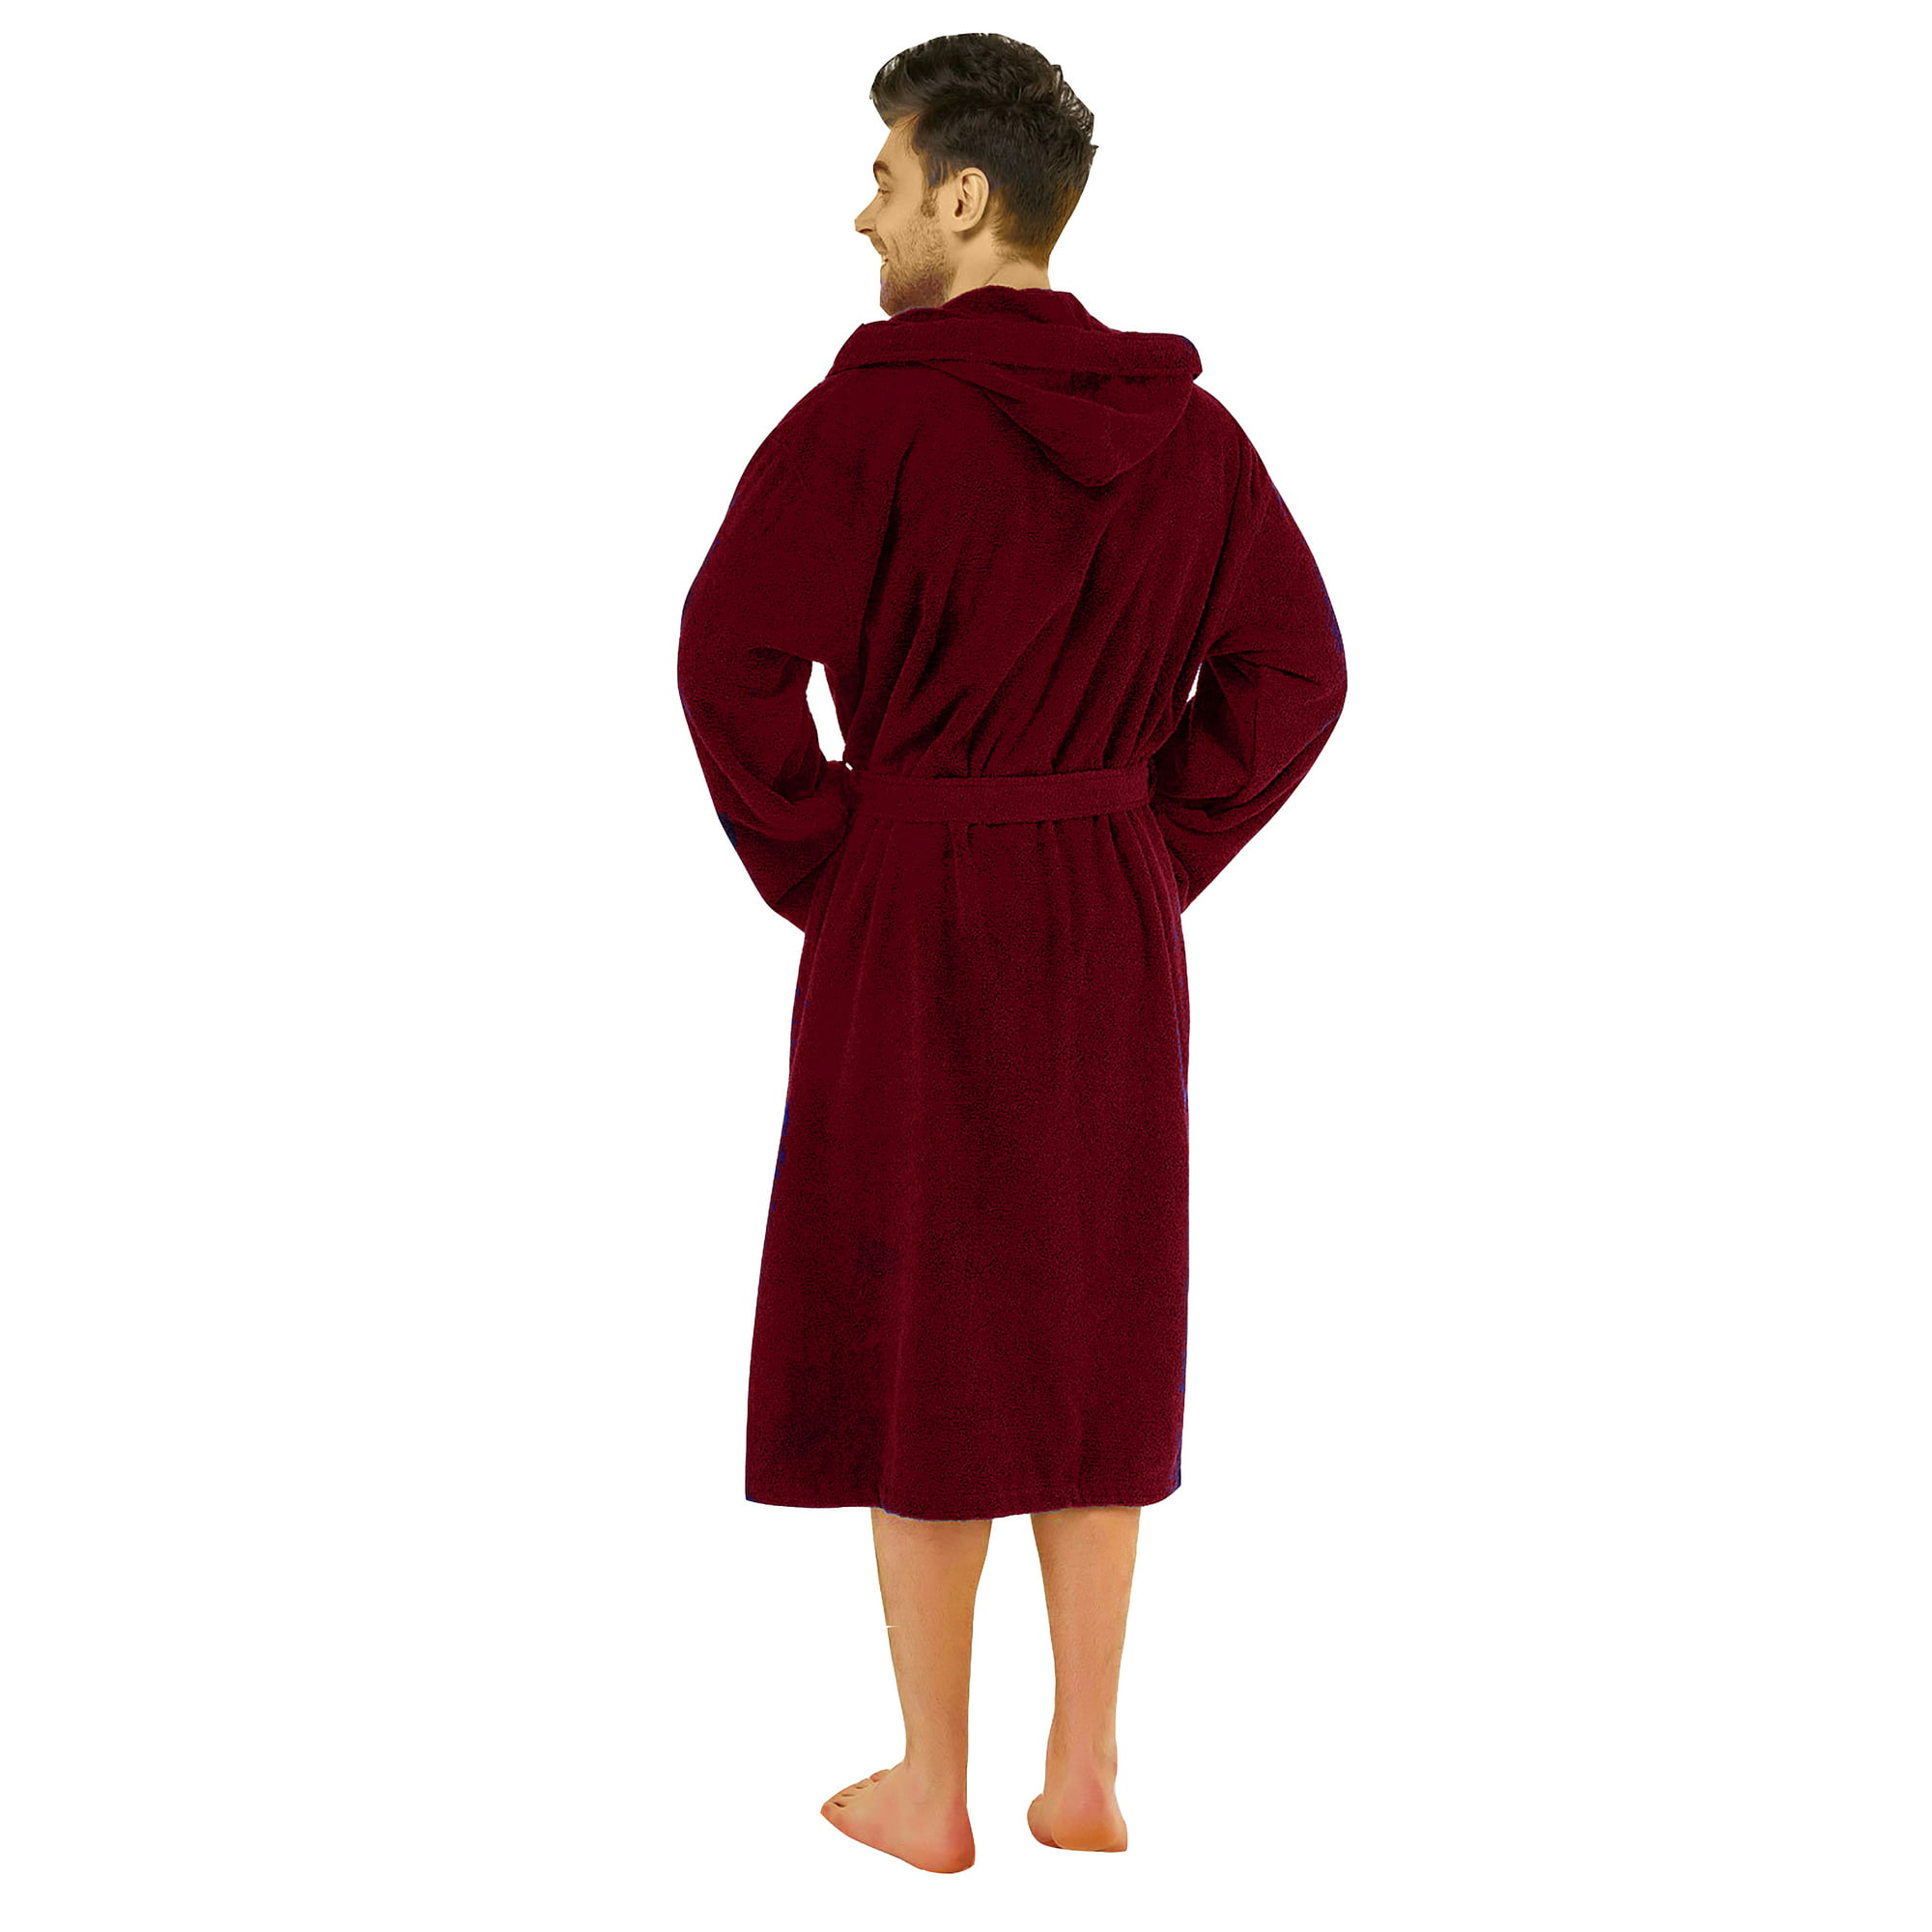 Spa & Resort Sales Burgundy 100% Cotton Terry Cloth Hooded Robe for Men, Size XXL, 51.5  inch Length. Spa & Resort Sales